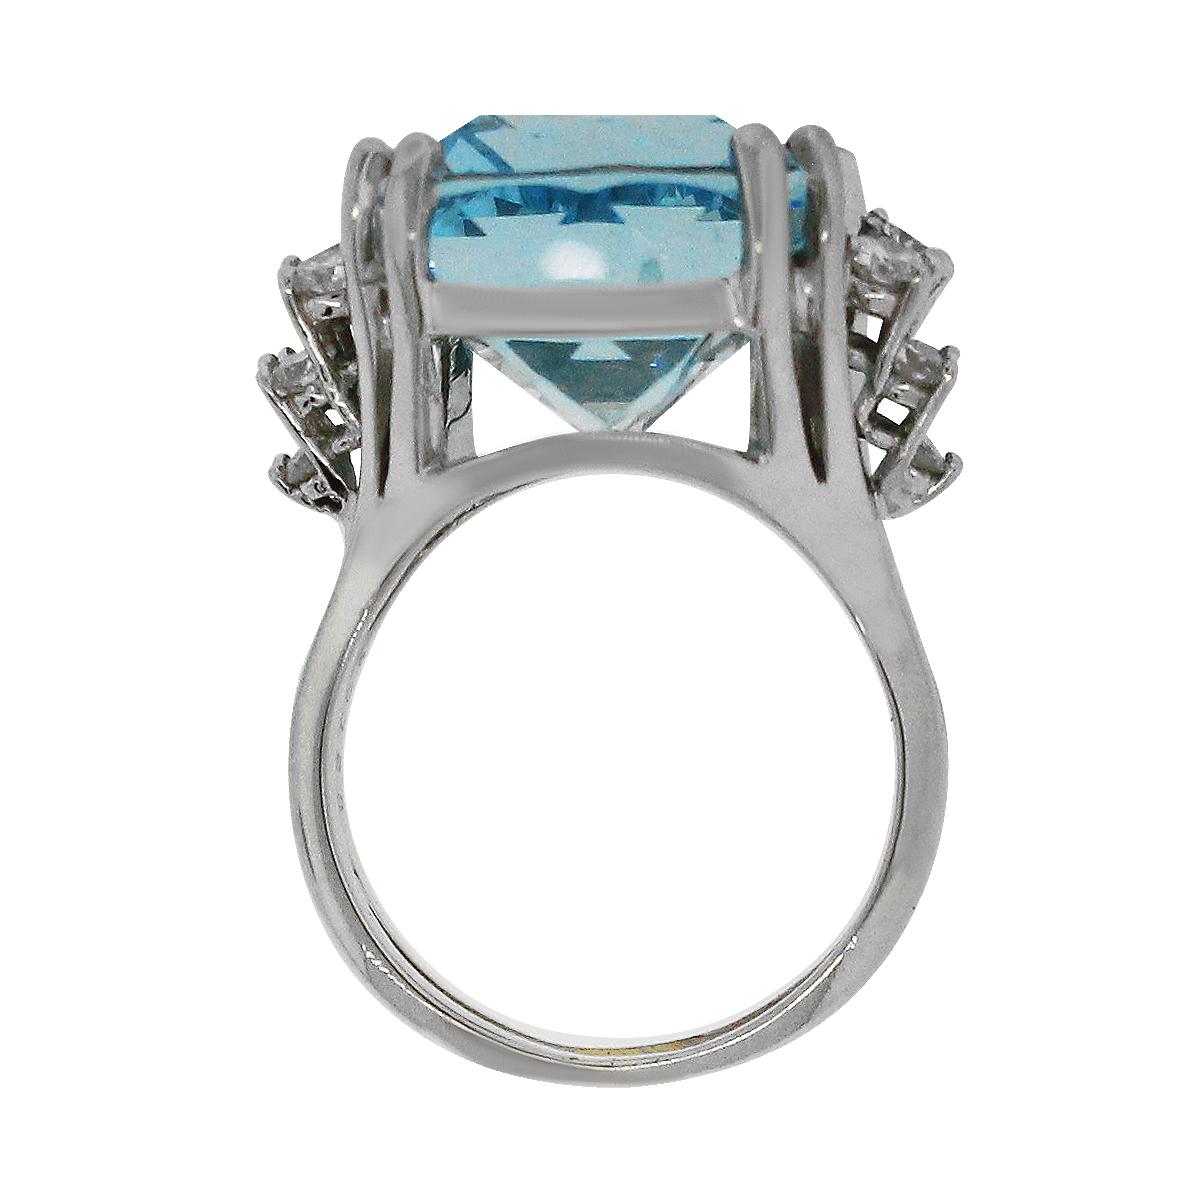 Material: 14k White Gold
Gemstone Details: Approximately 18.16 aquamarine gemstone
Diamond Details: Approximately 0.70ctw round brilliant diamonds. Diamonds are G/H in color and SI in clarity.
Ring Size: 7
Total Weight: 10.8g (7.0dwt)
Measurements: